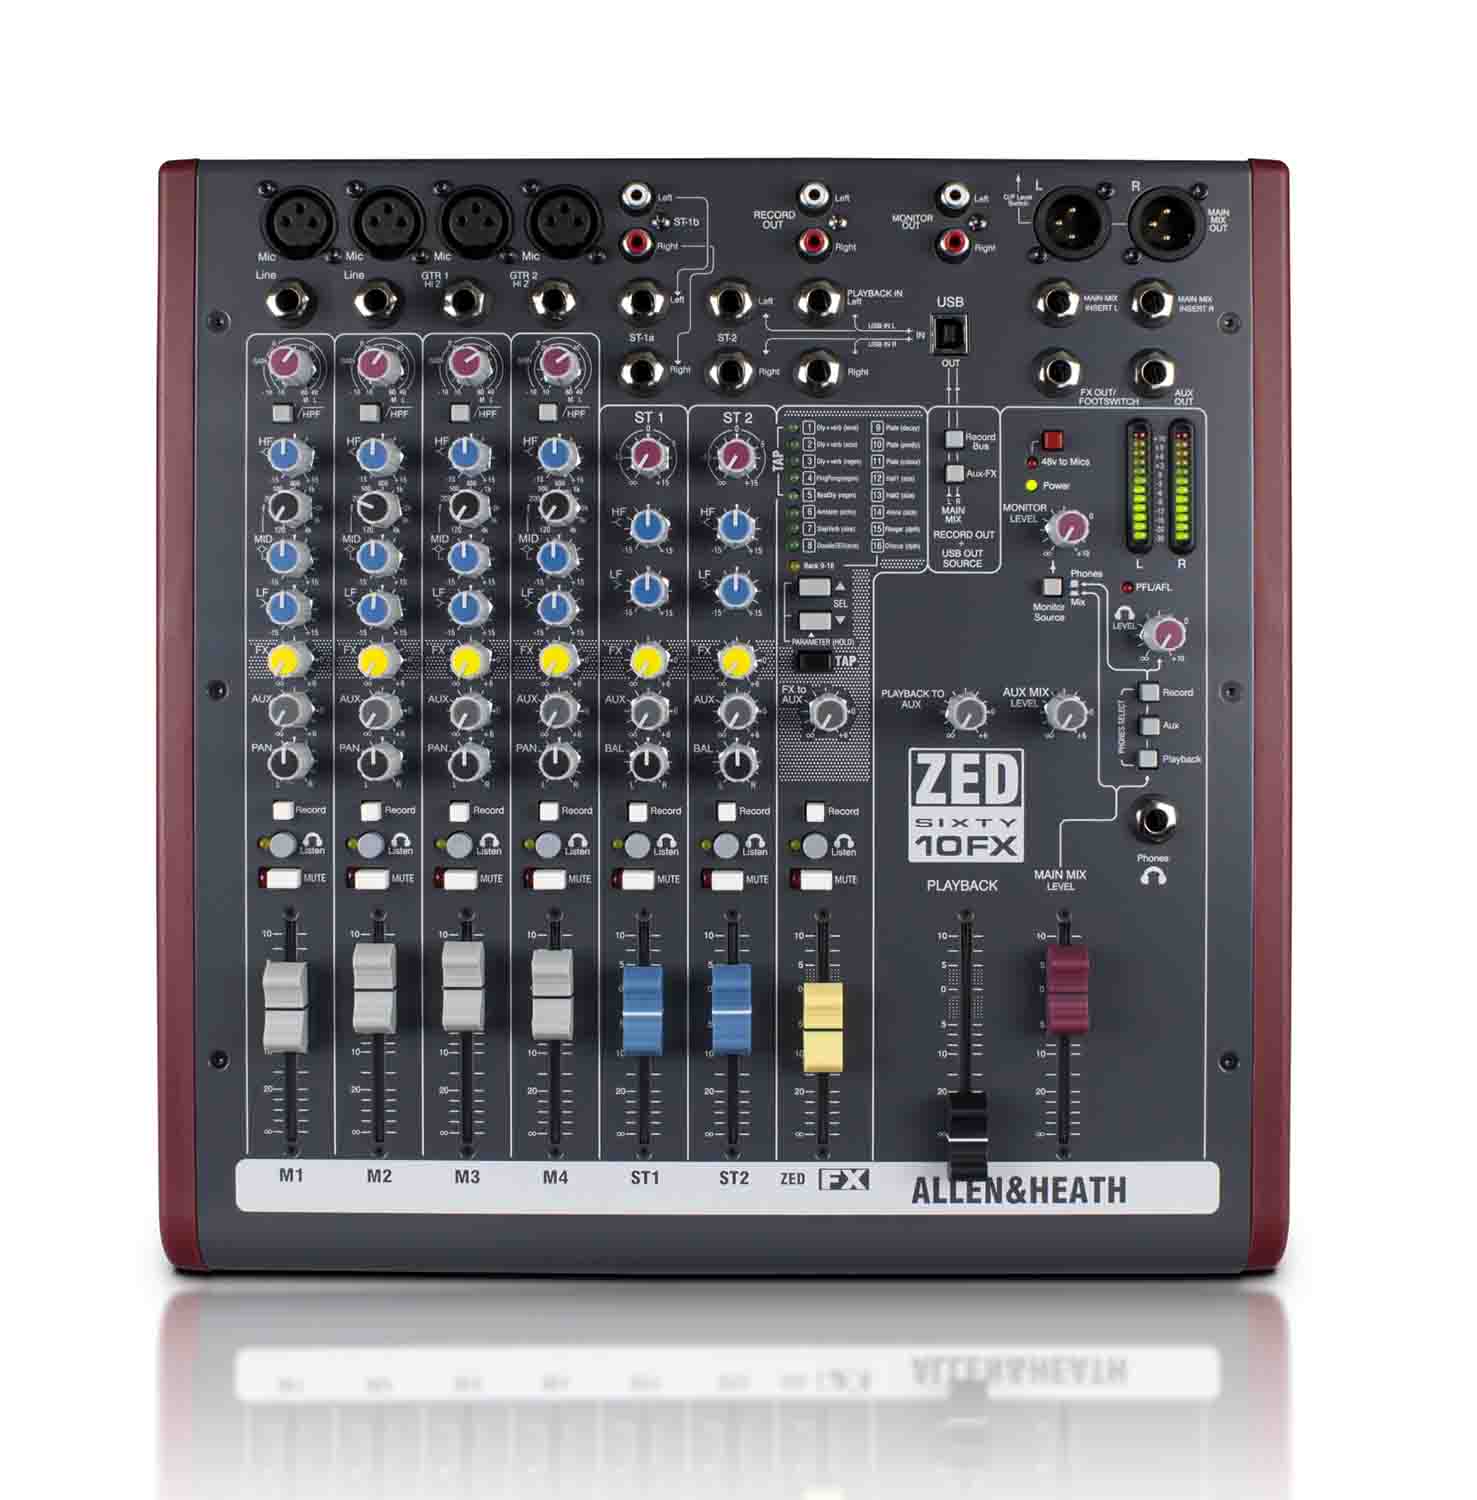 Allen & Heath ZED60-10FX Multipurpose 10-Channel Mixer with USB Audio Interface and Effects - Hollywood DJ